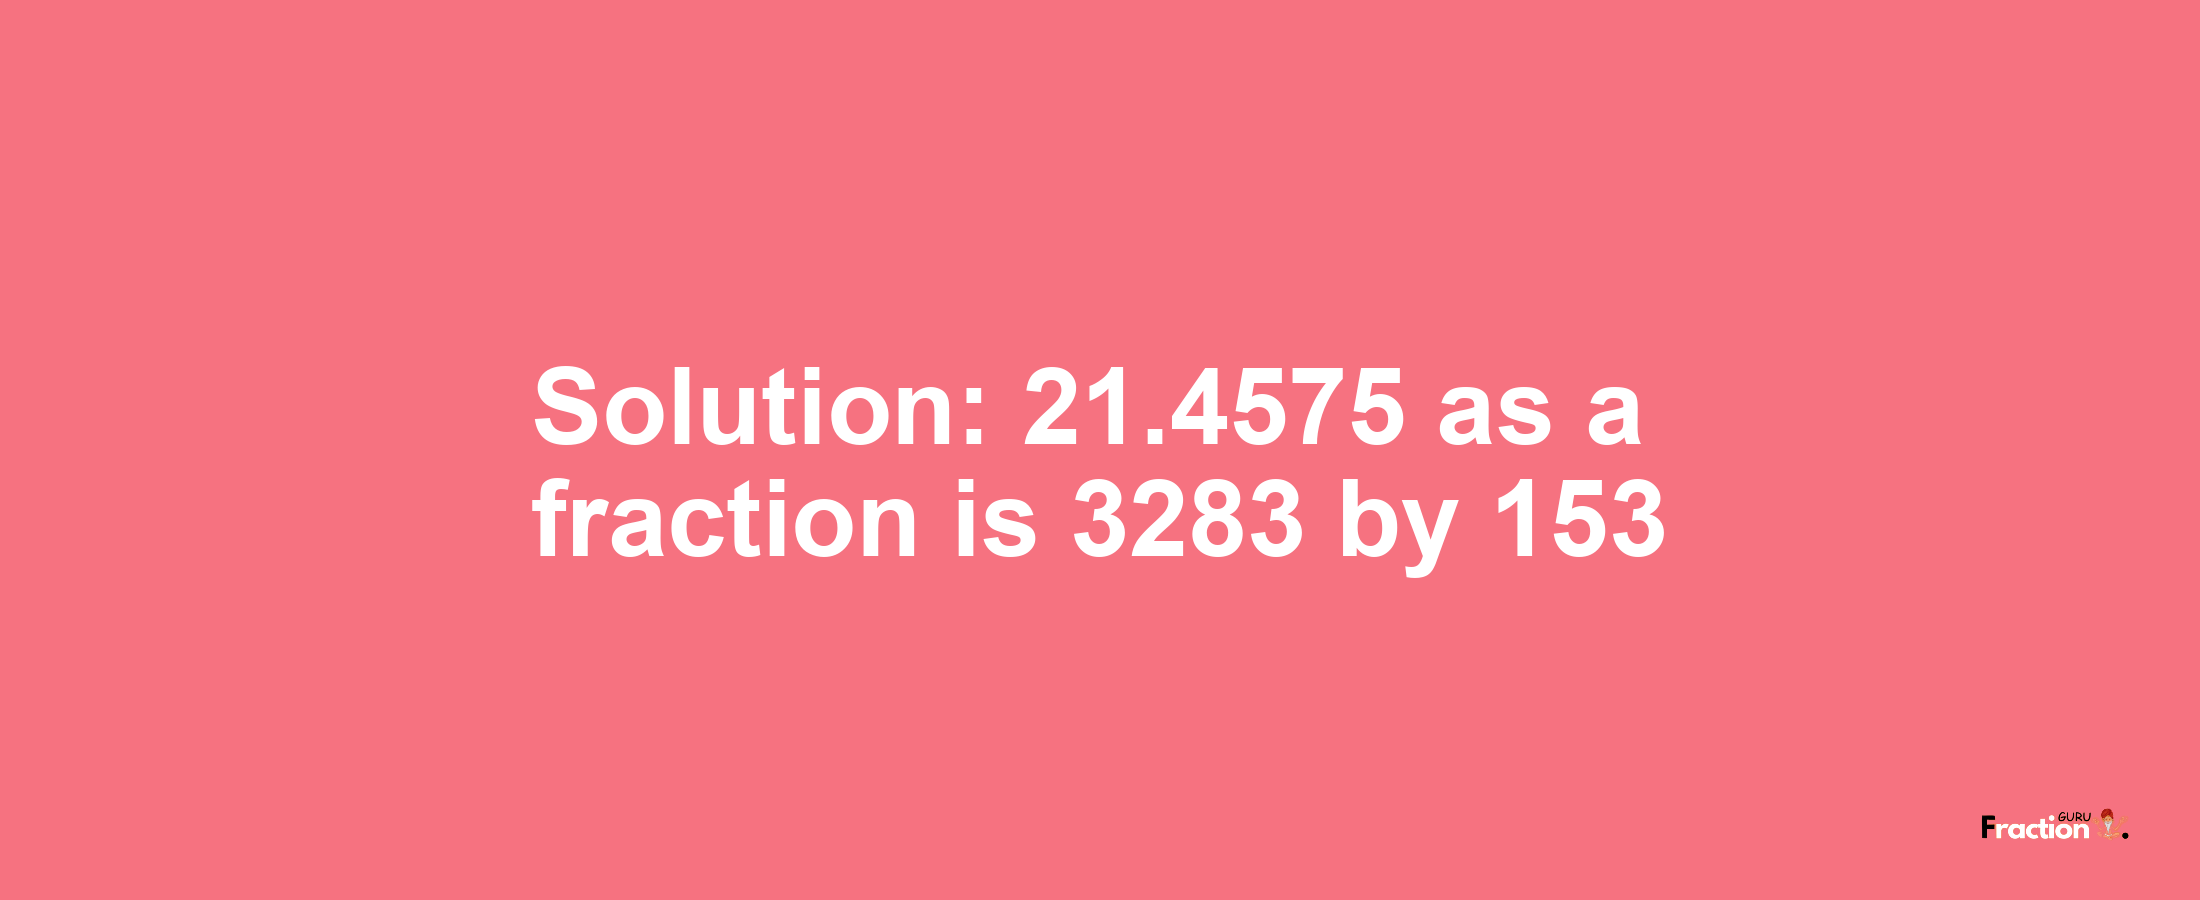 Solution:21.4575 as a fraction is 3283/153